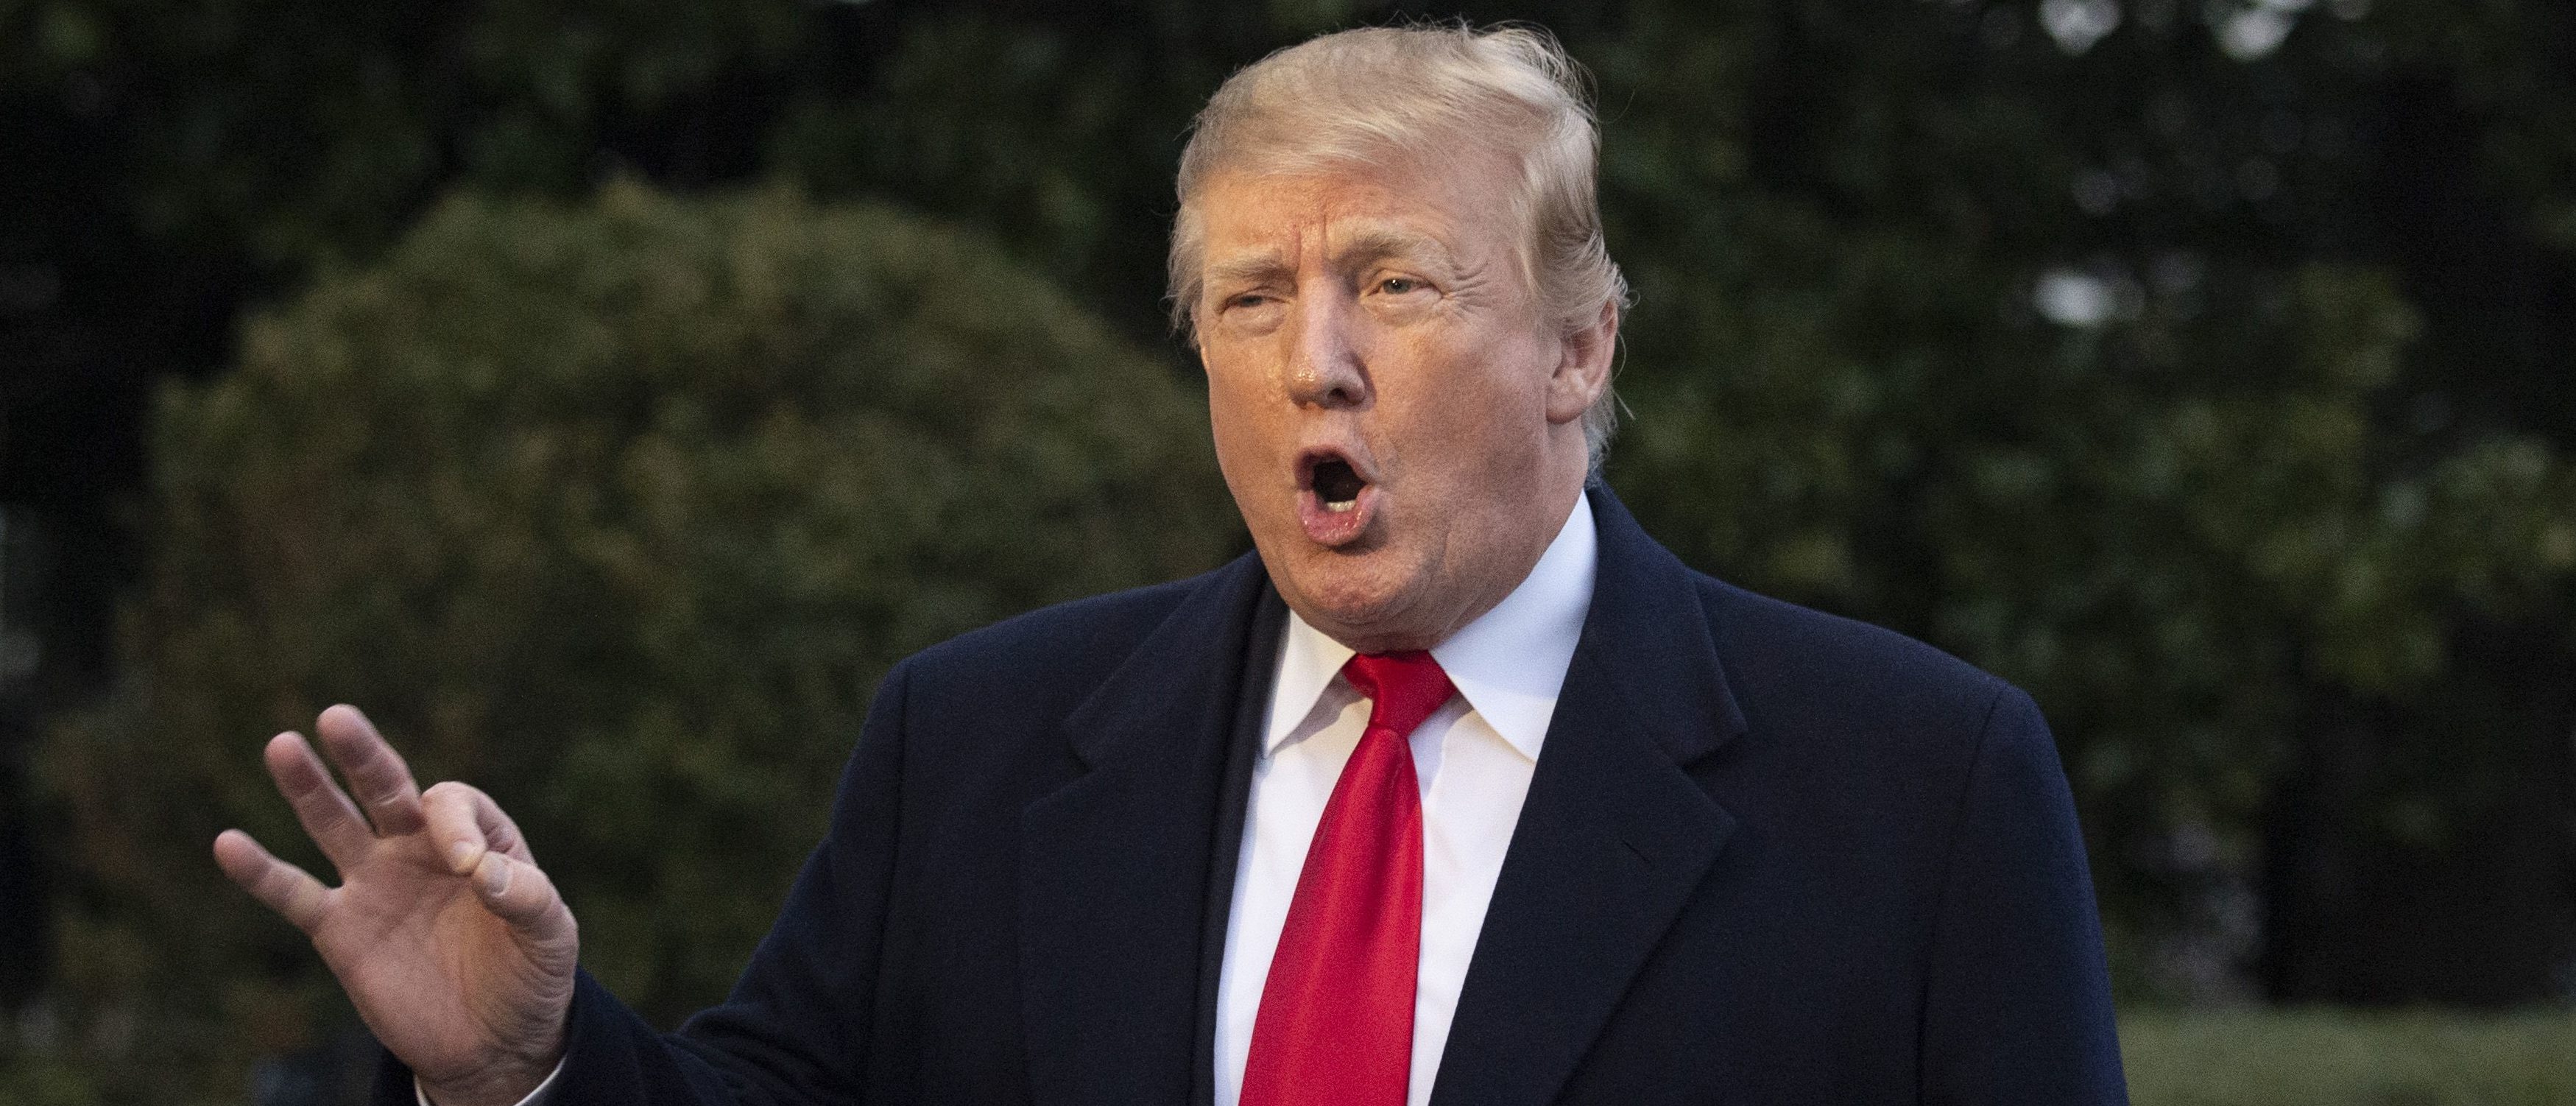 US President Donald Trump returns to the White House on March 24, 2019 in Washington, DC after spending the weekend in Florida. Trump declared he had been completely exonerated after his campaign was cleared of colluding with Russia in the 2016 election campaign. (ERIC BARADAT/AFP/Getty Images)